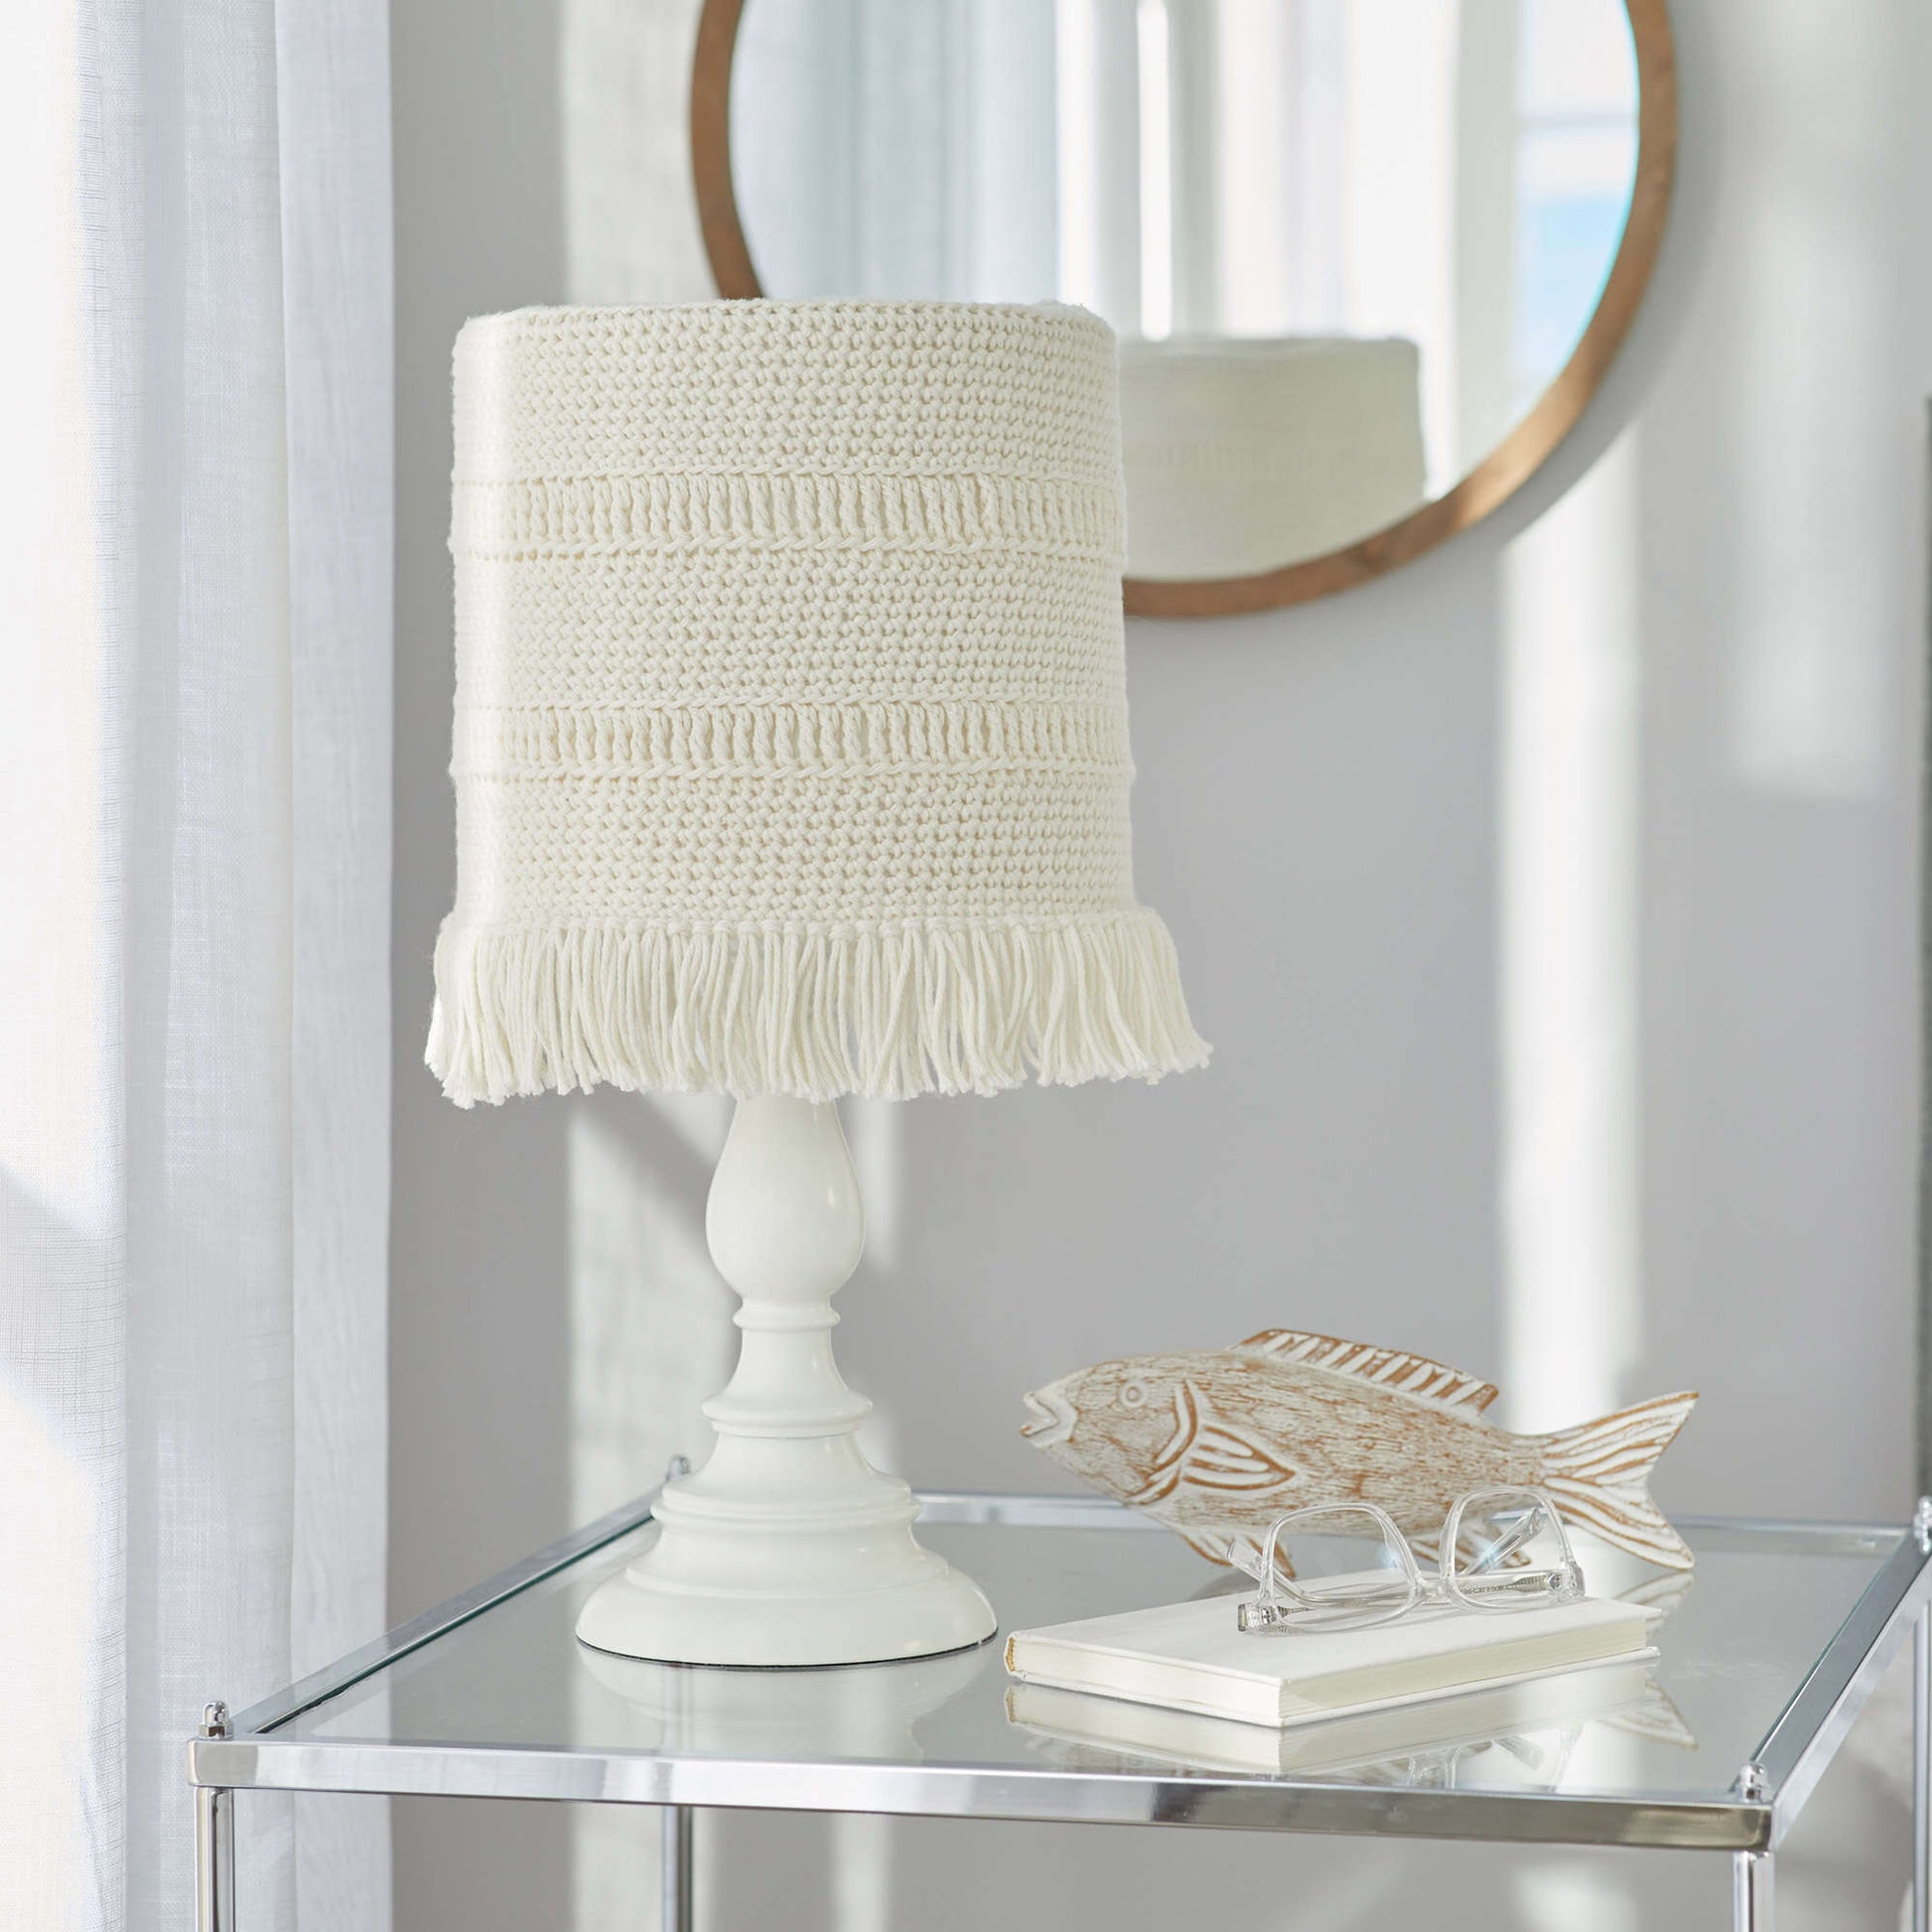 Free Red Heart Coastline Lampshade Cover Crochet Pattern